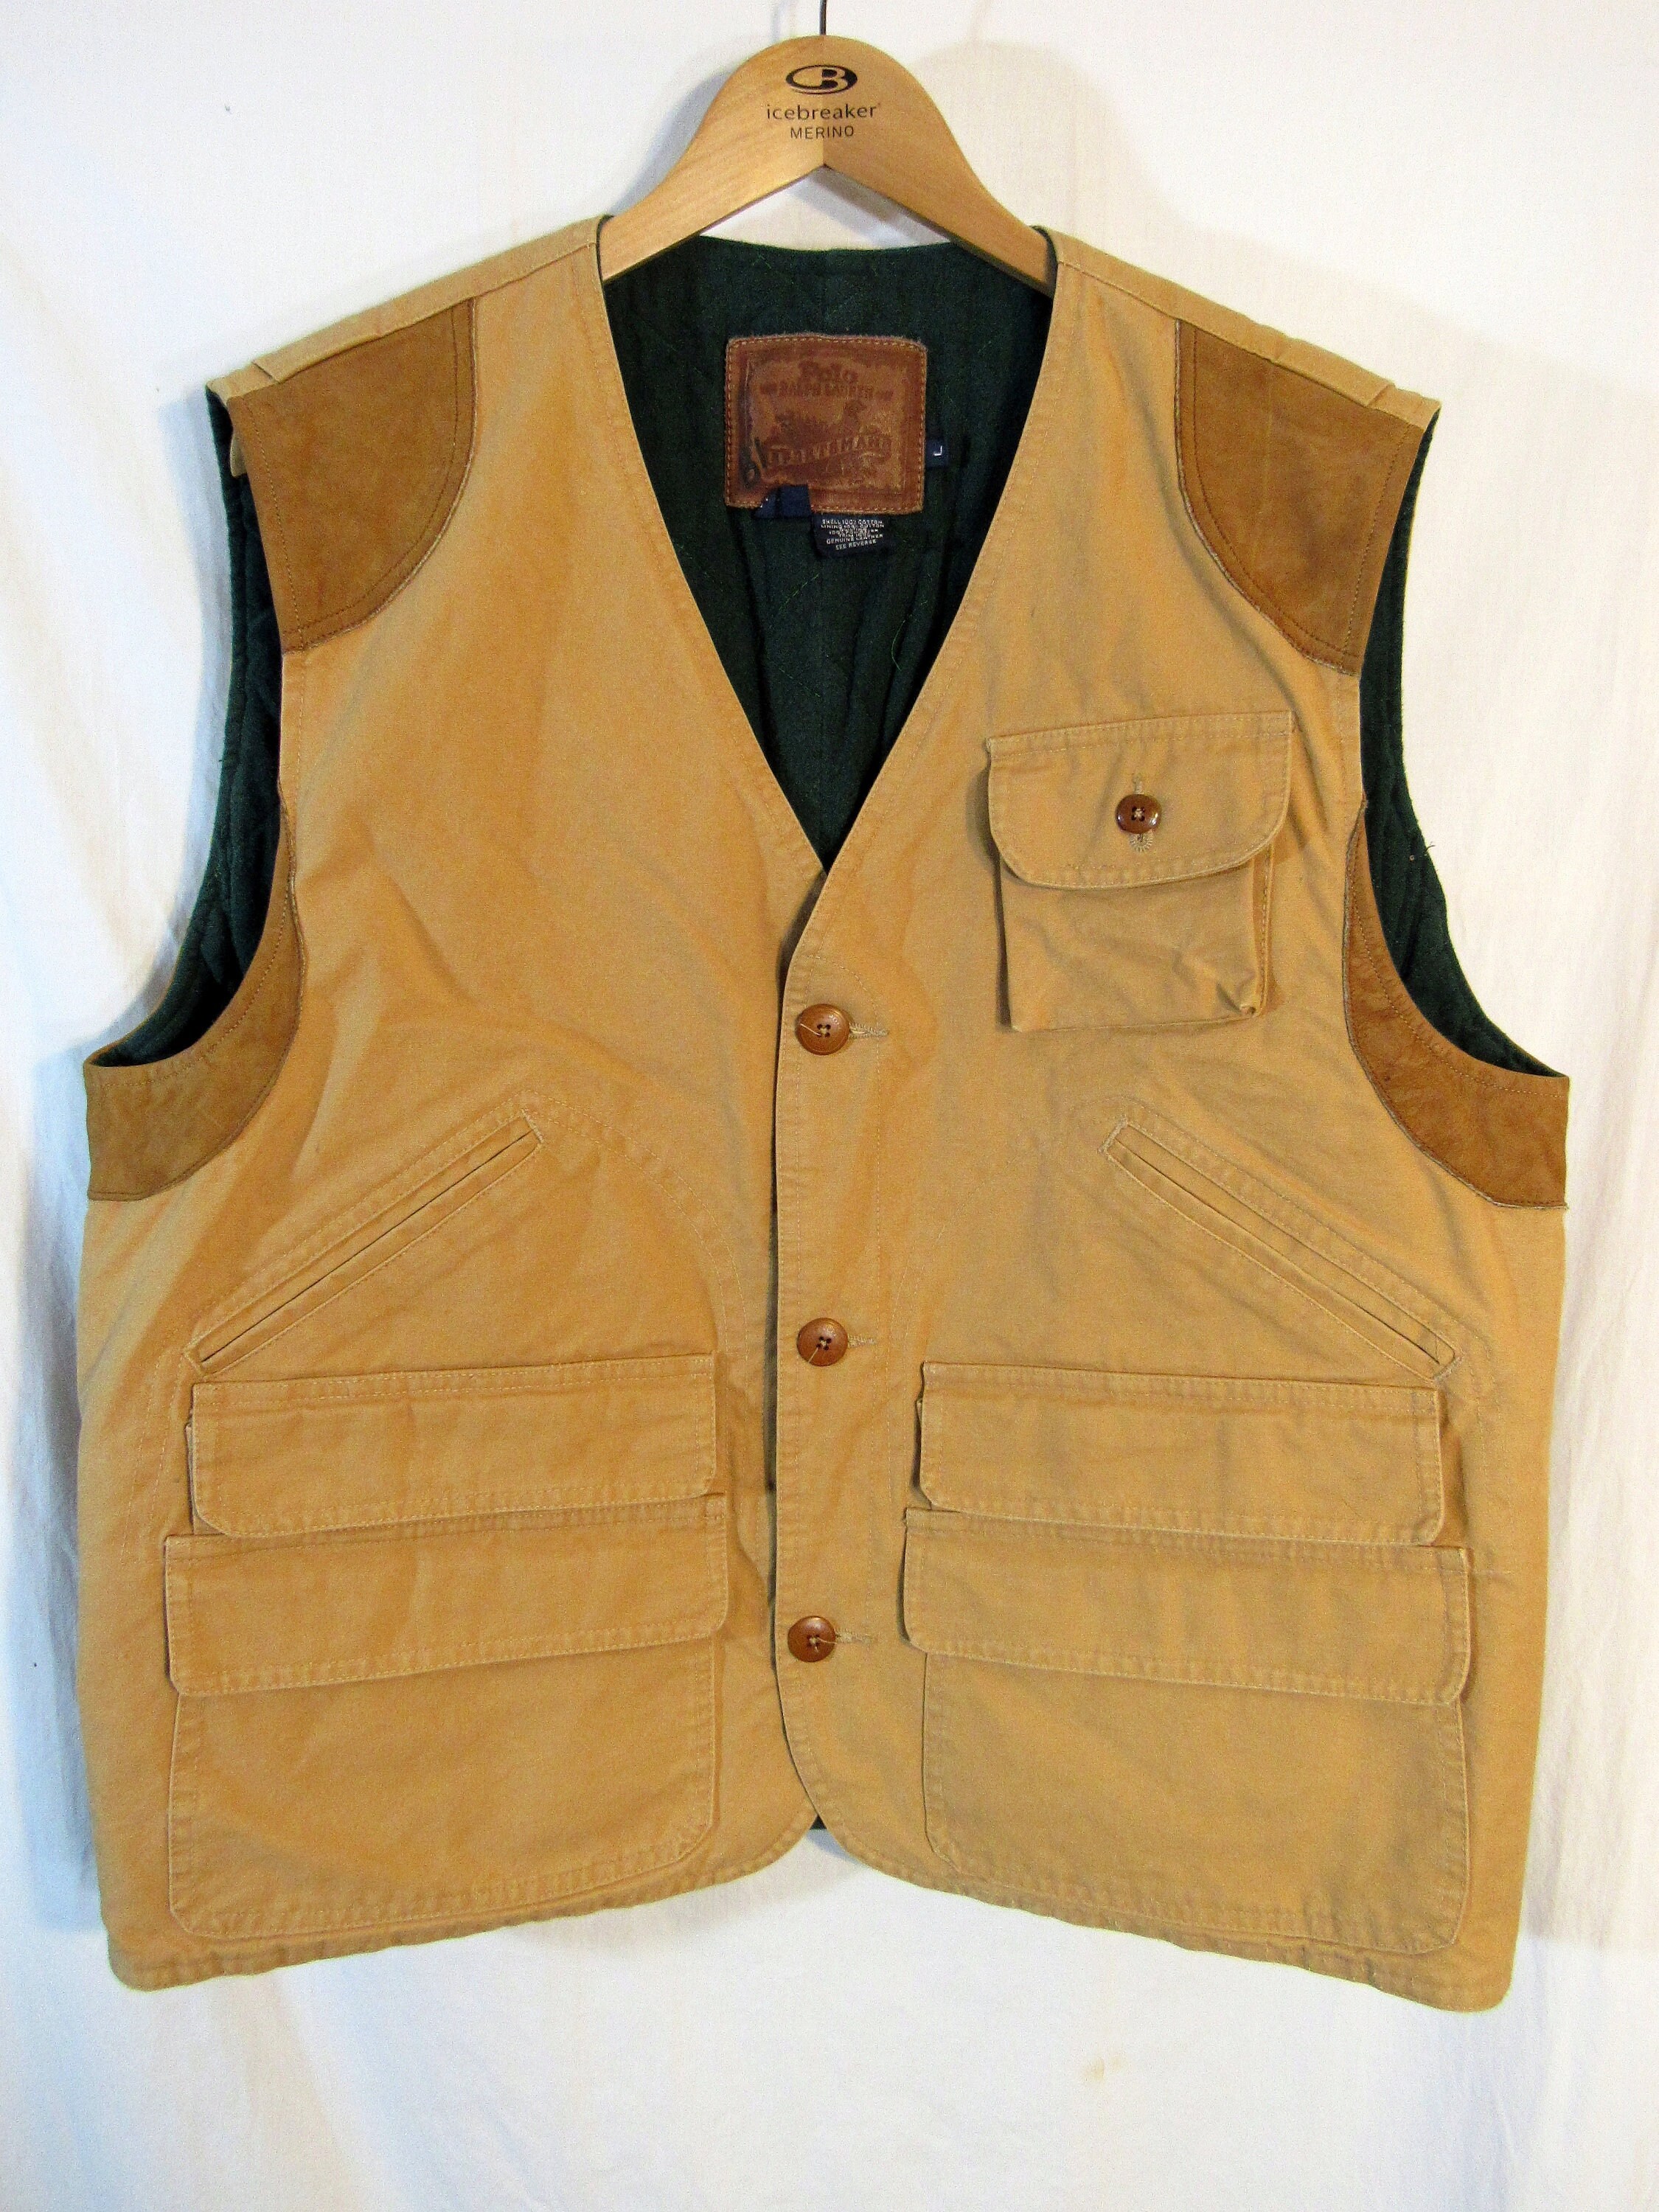 Vintage New With Tags the Pro vest Fly Fishing Vest khaki Sz xl NOS